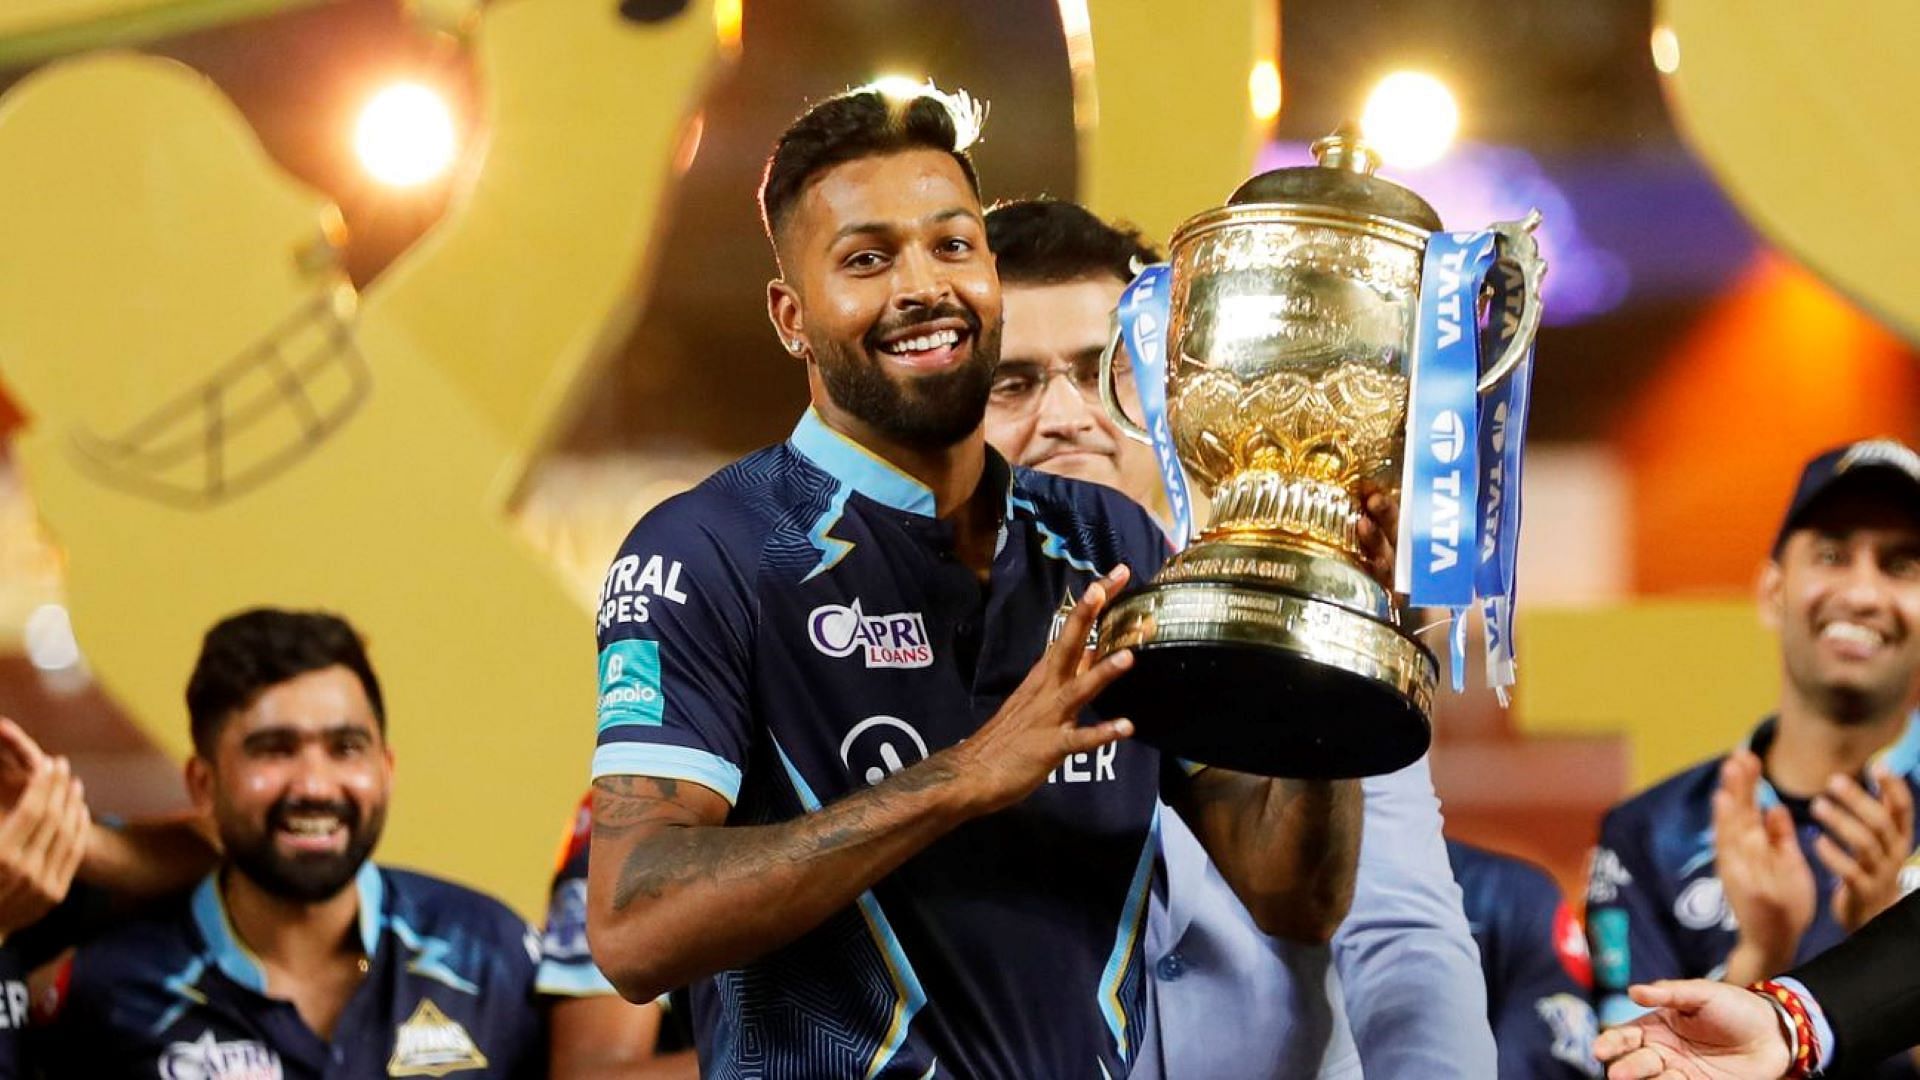 Gujarat Titans exceeded all expectations in 2022 by winning the IPL title.